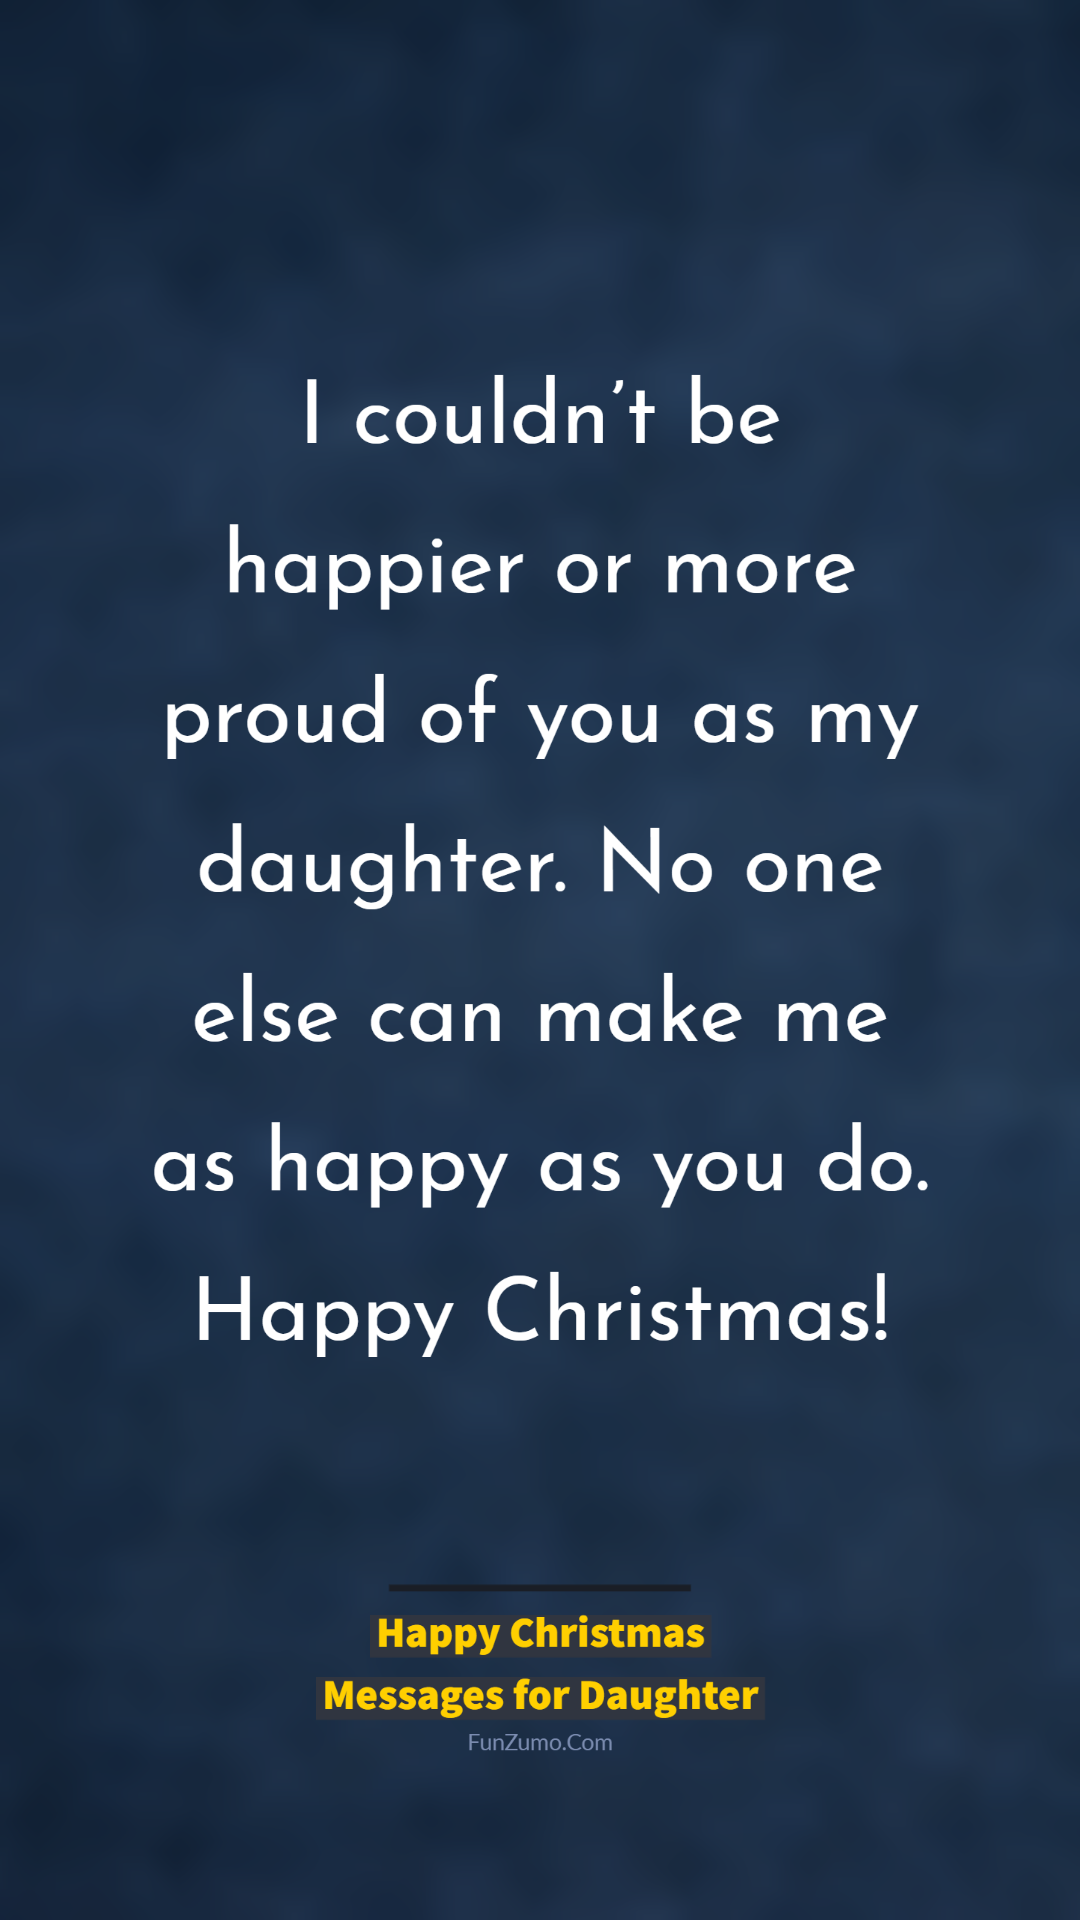 heartwarming christmas messages for daughter from mother and dad